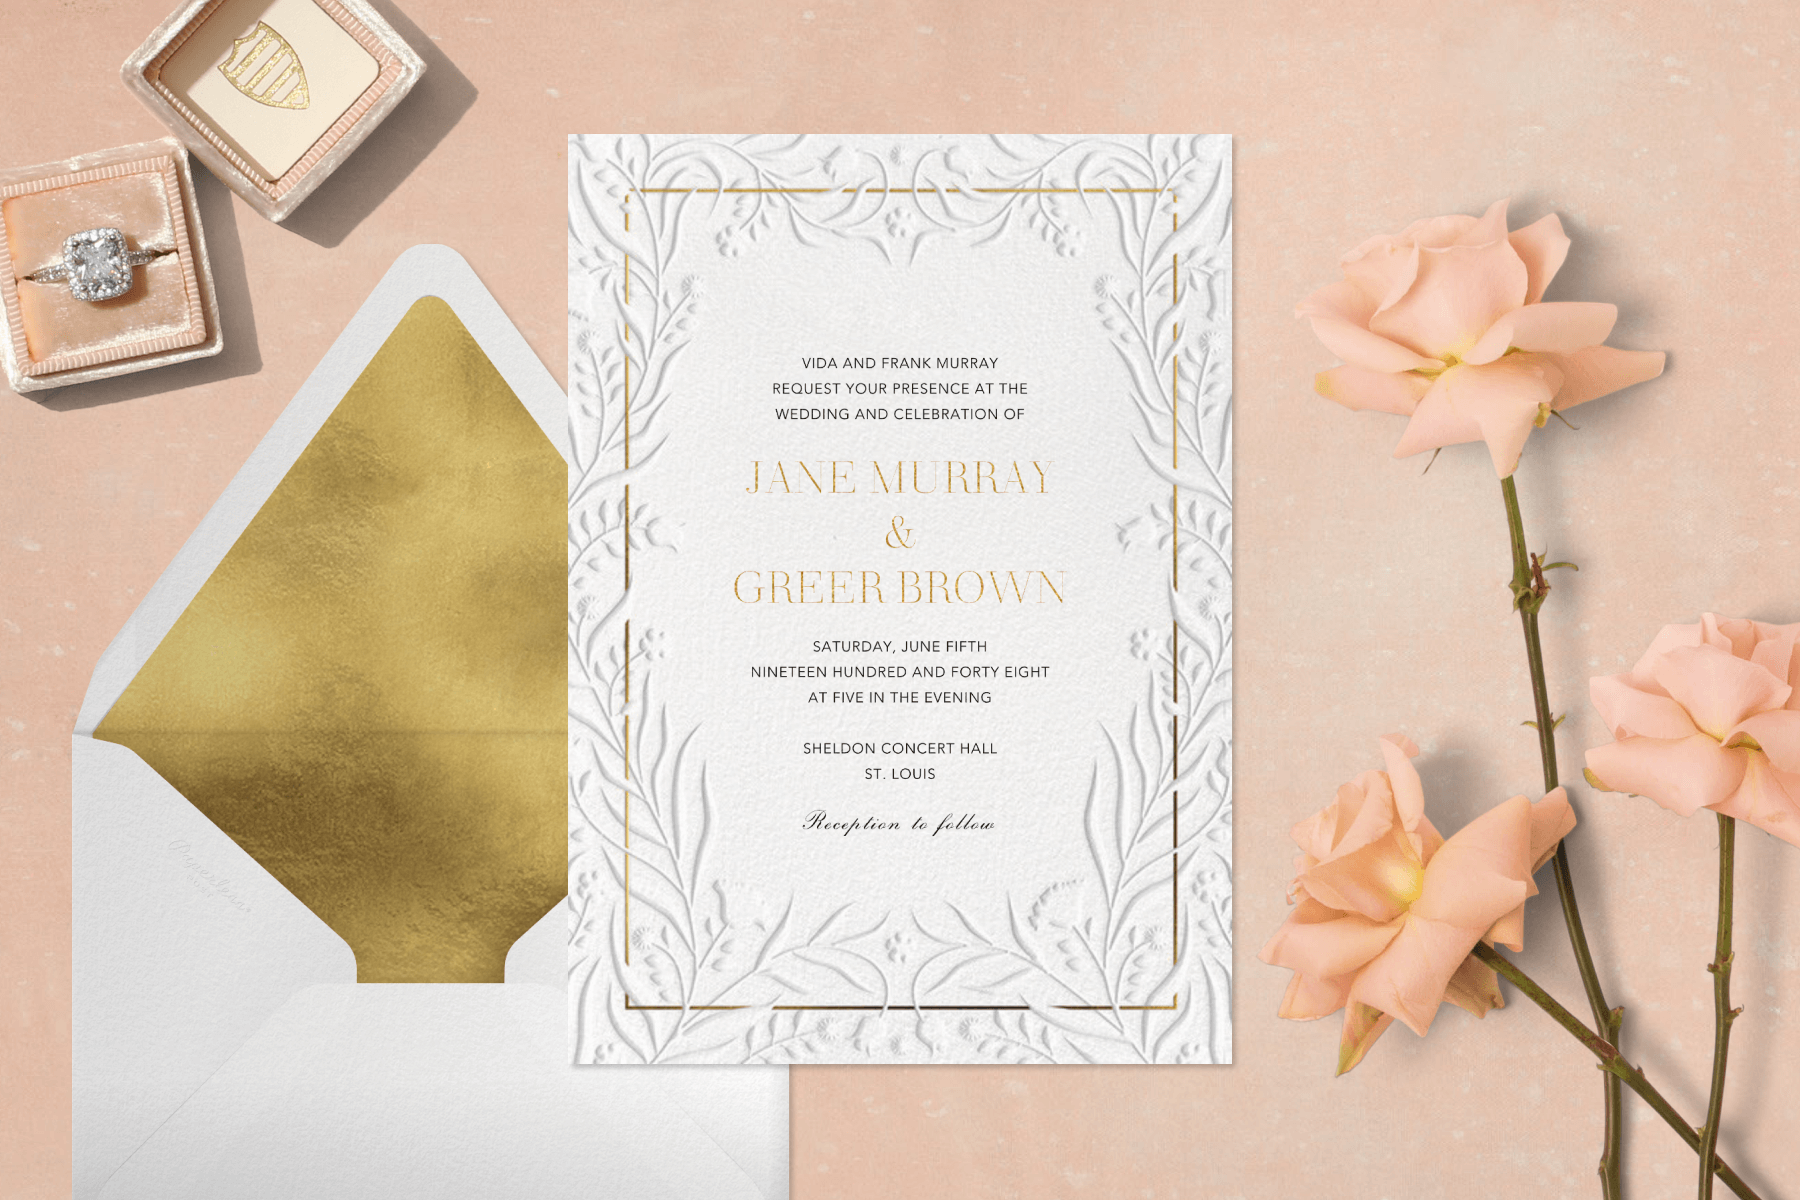 10 wedding invitation ideas that'll have your guests counting down the days